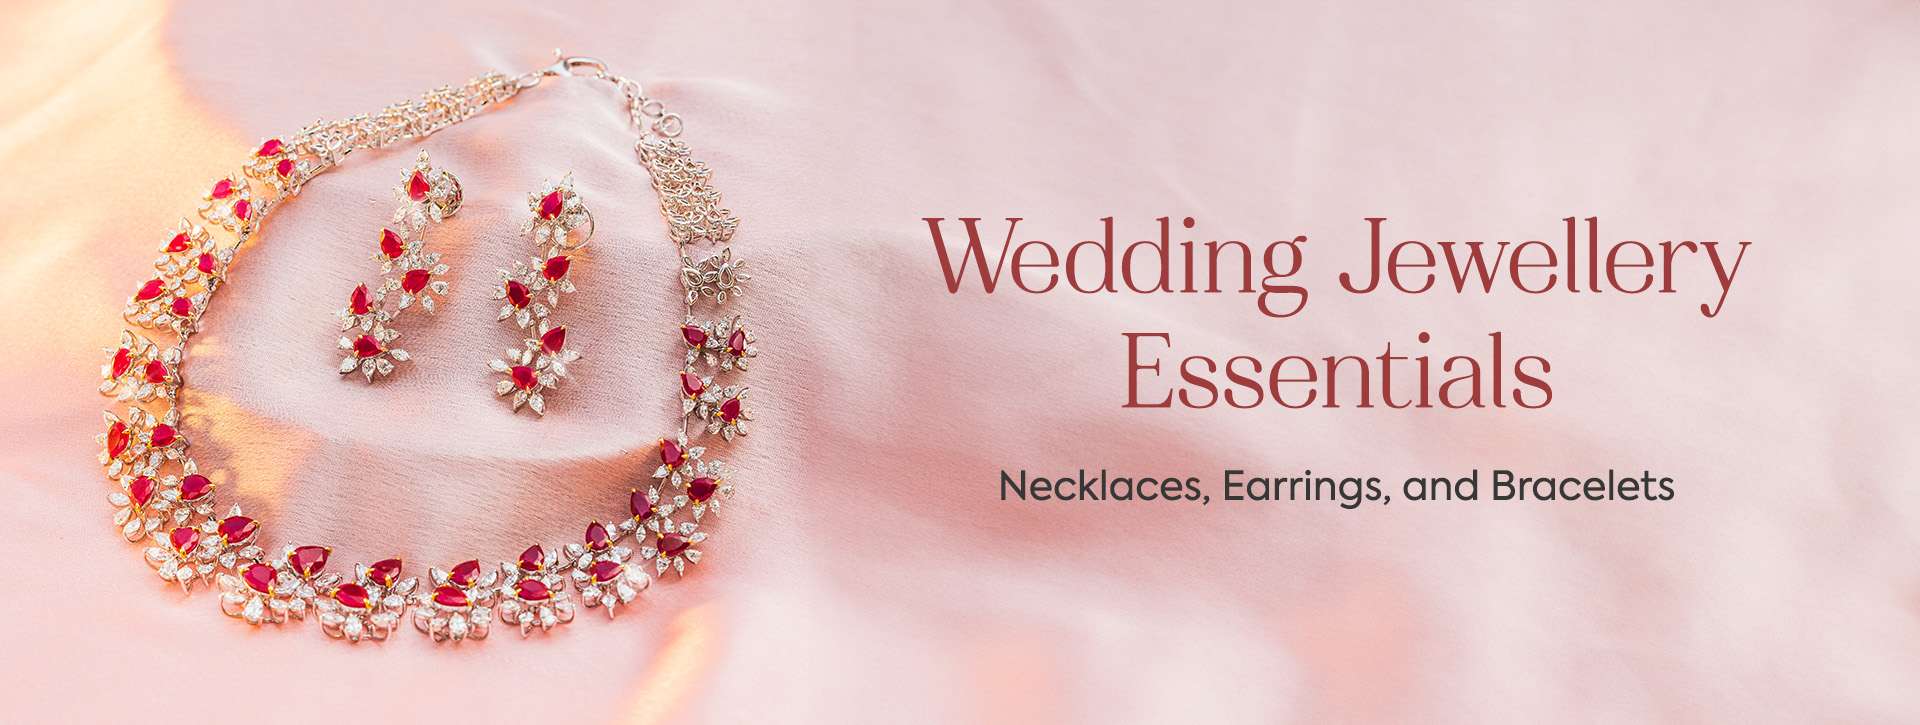 Wedding Jewellery Essentials: Necklaces, Earrings, and Bracelets